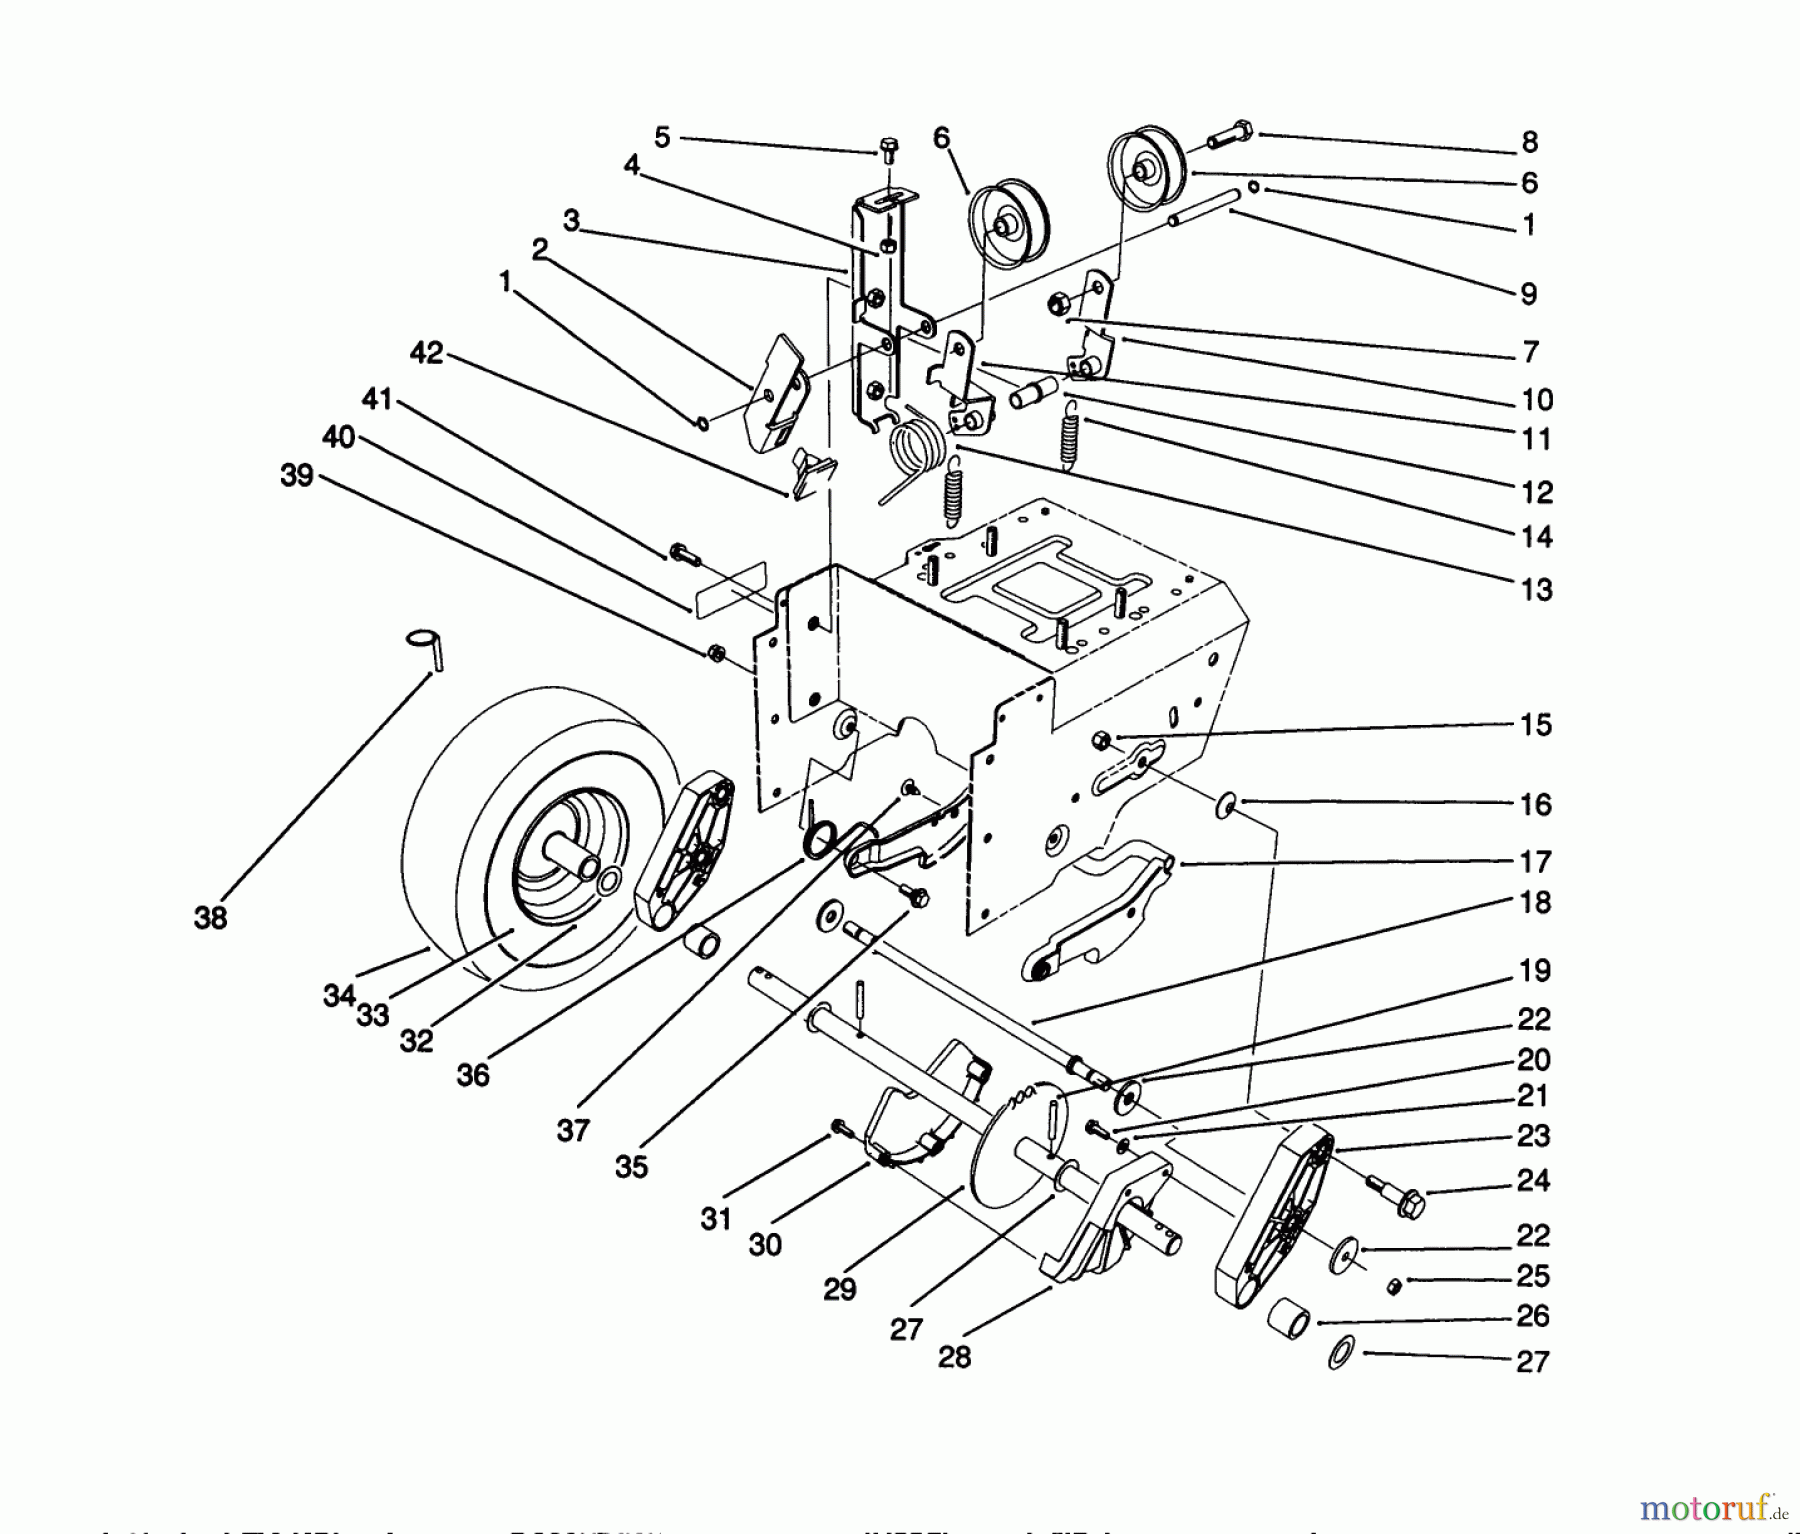  Toro Neu Snow Blowers/Snow Throwers Seite 1 38540 (824) - Toro 824 Power Shift Snowthrower, 1991 (1000001-1999999) TRACTION DRIVE ASSEMBLY